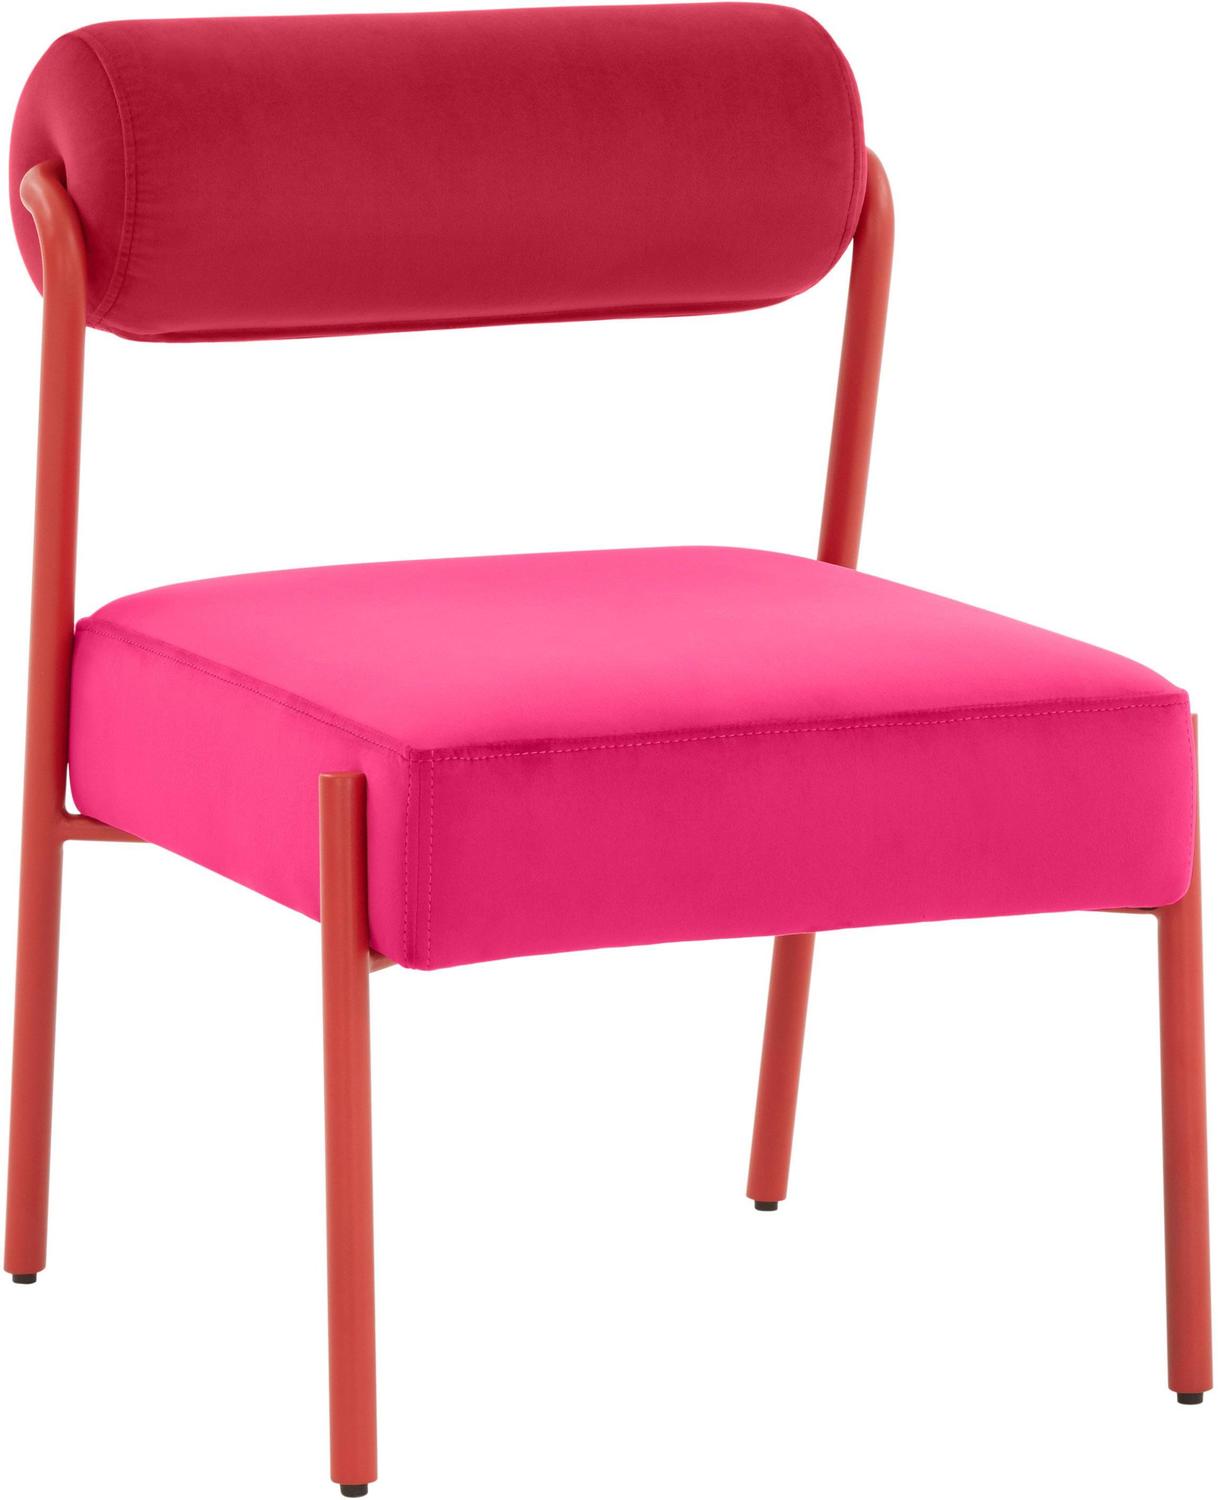 grey upholstered dining chair Tov Furniture Dining Chairs Pink